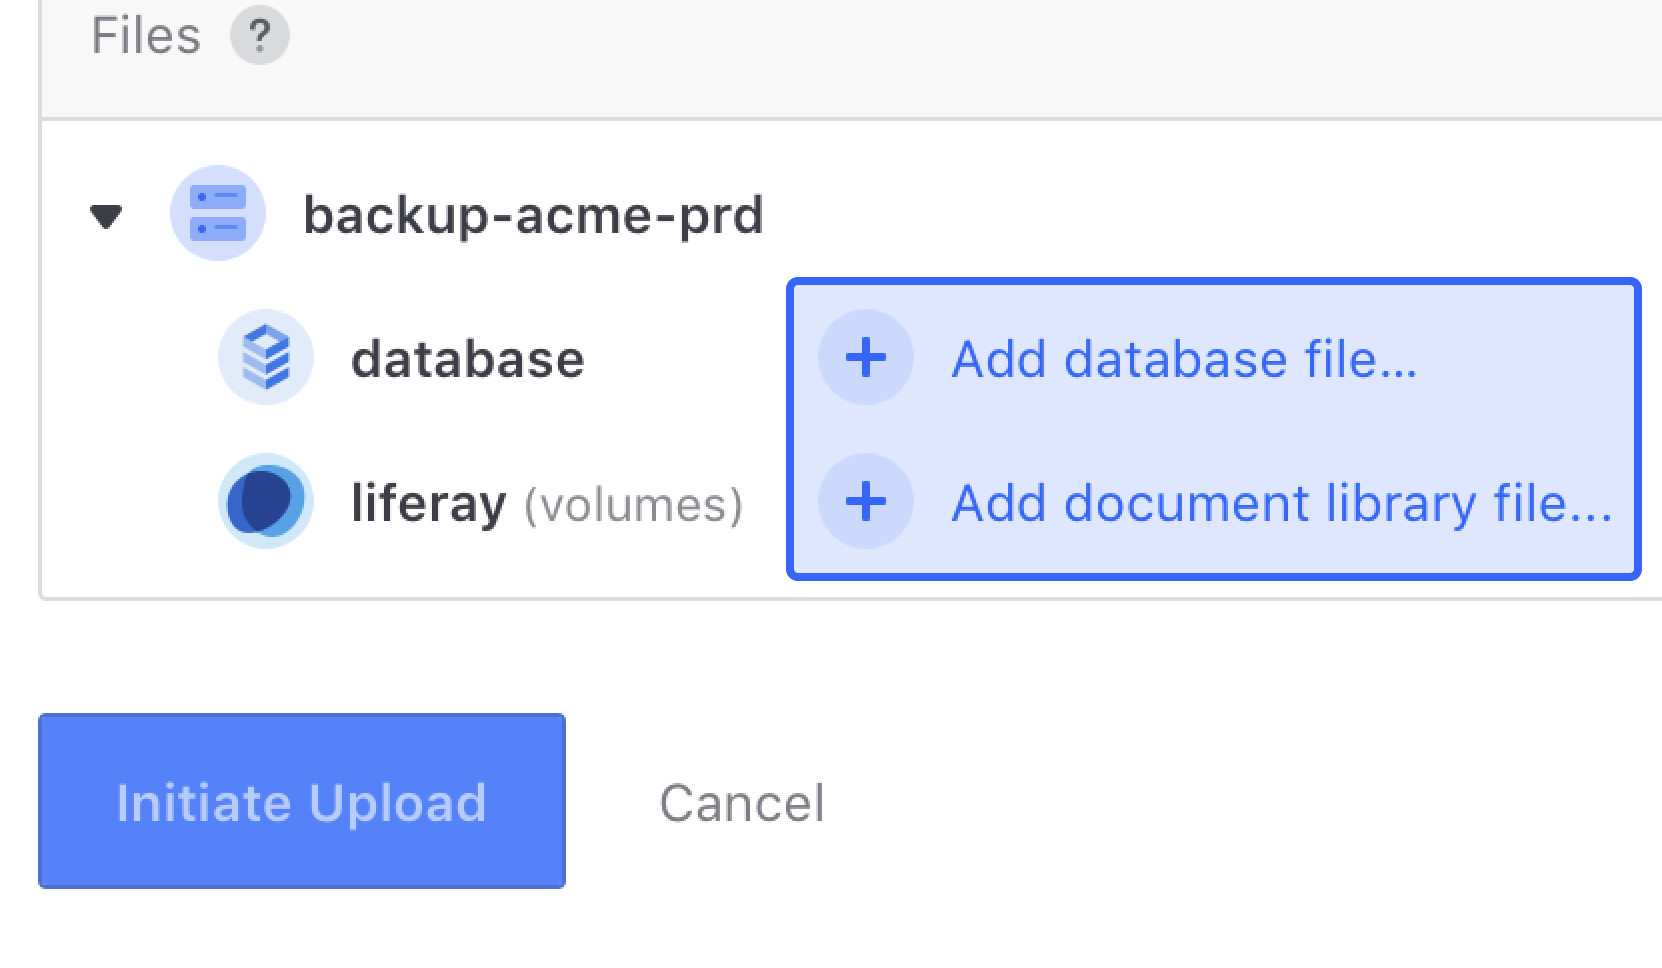 Click the buttons to upload the database and document library as a new backup.